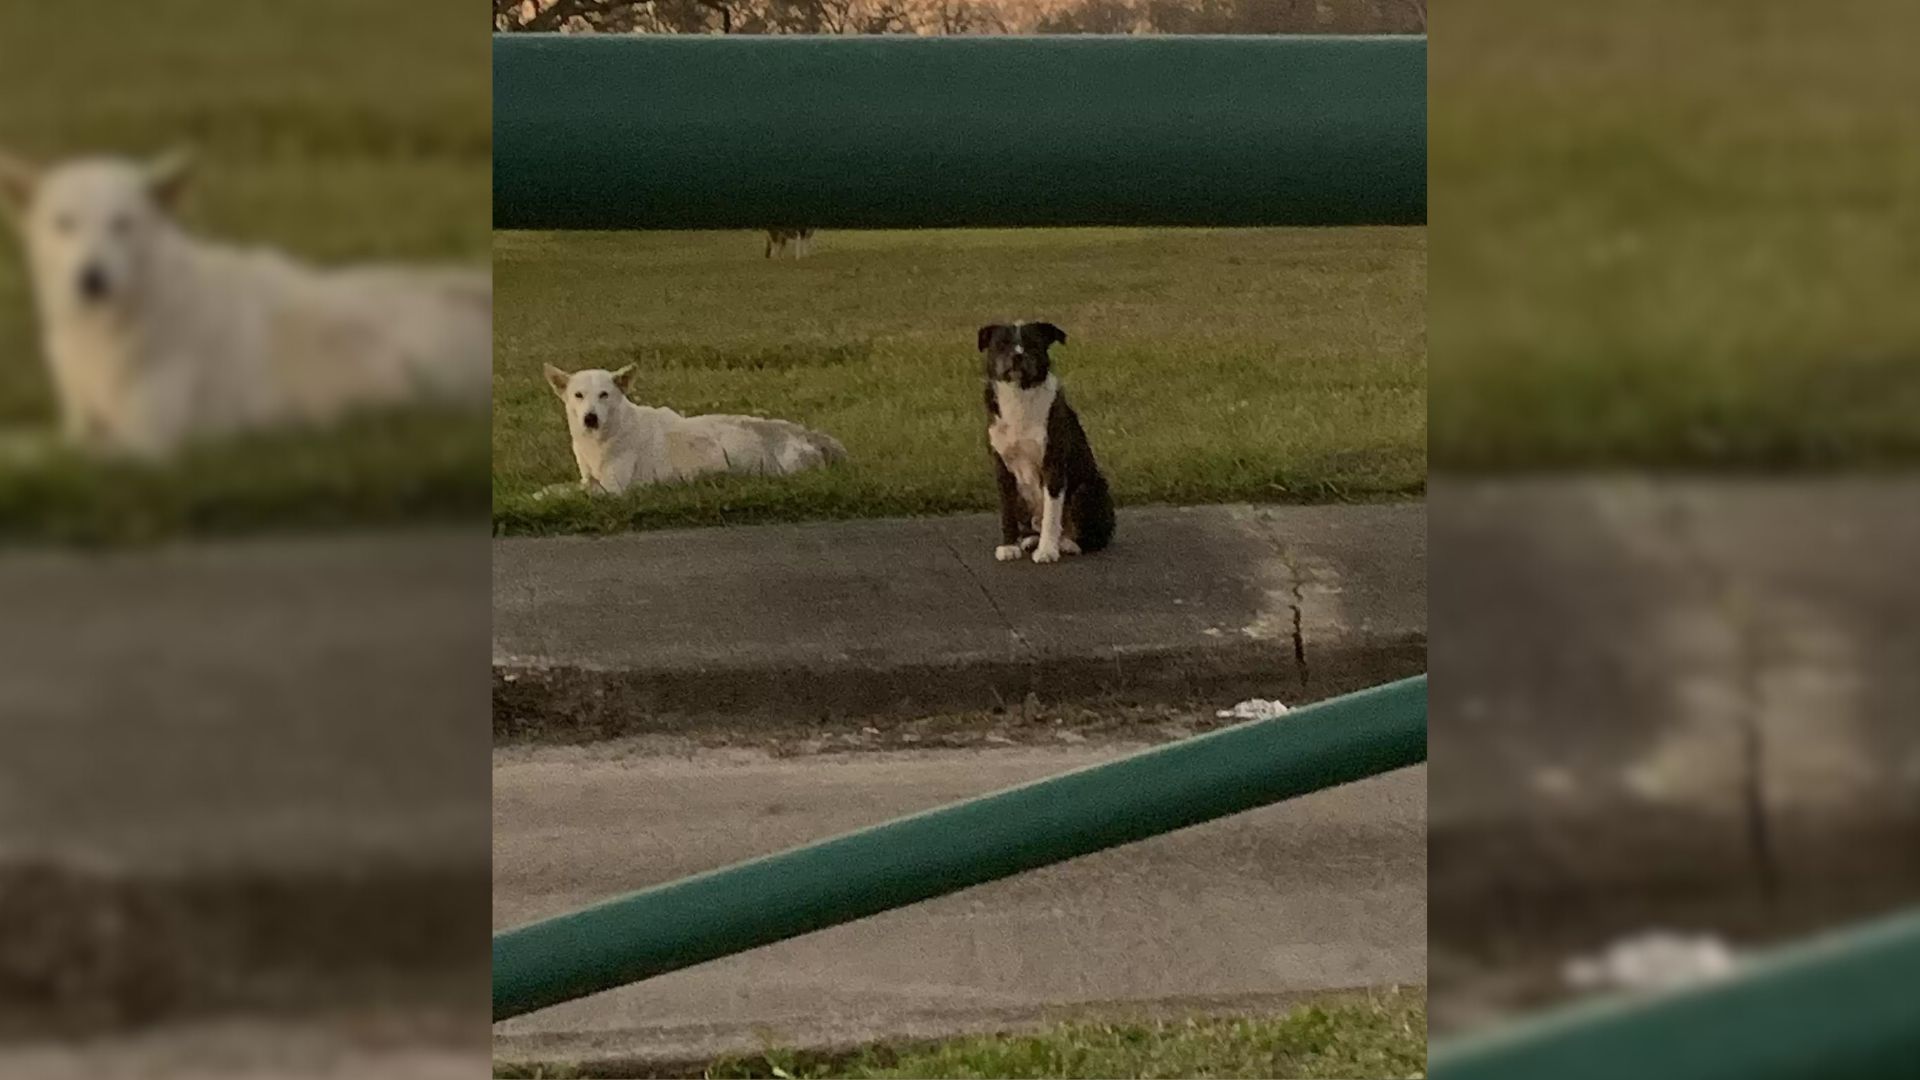 Loyal Stray Dog Stayed With His Injured Friend Until Rescuers Came To Help